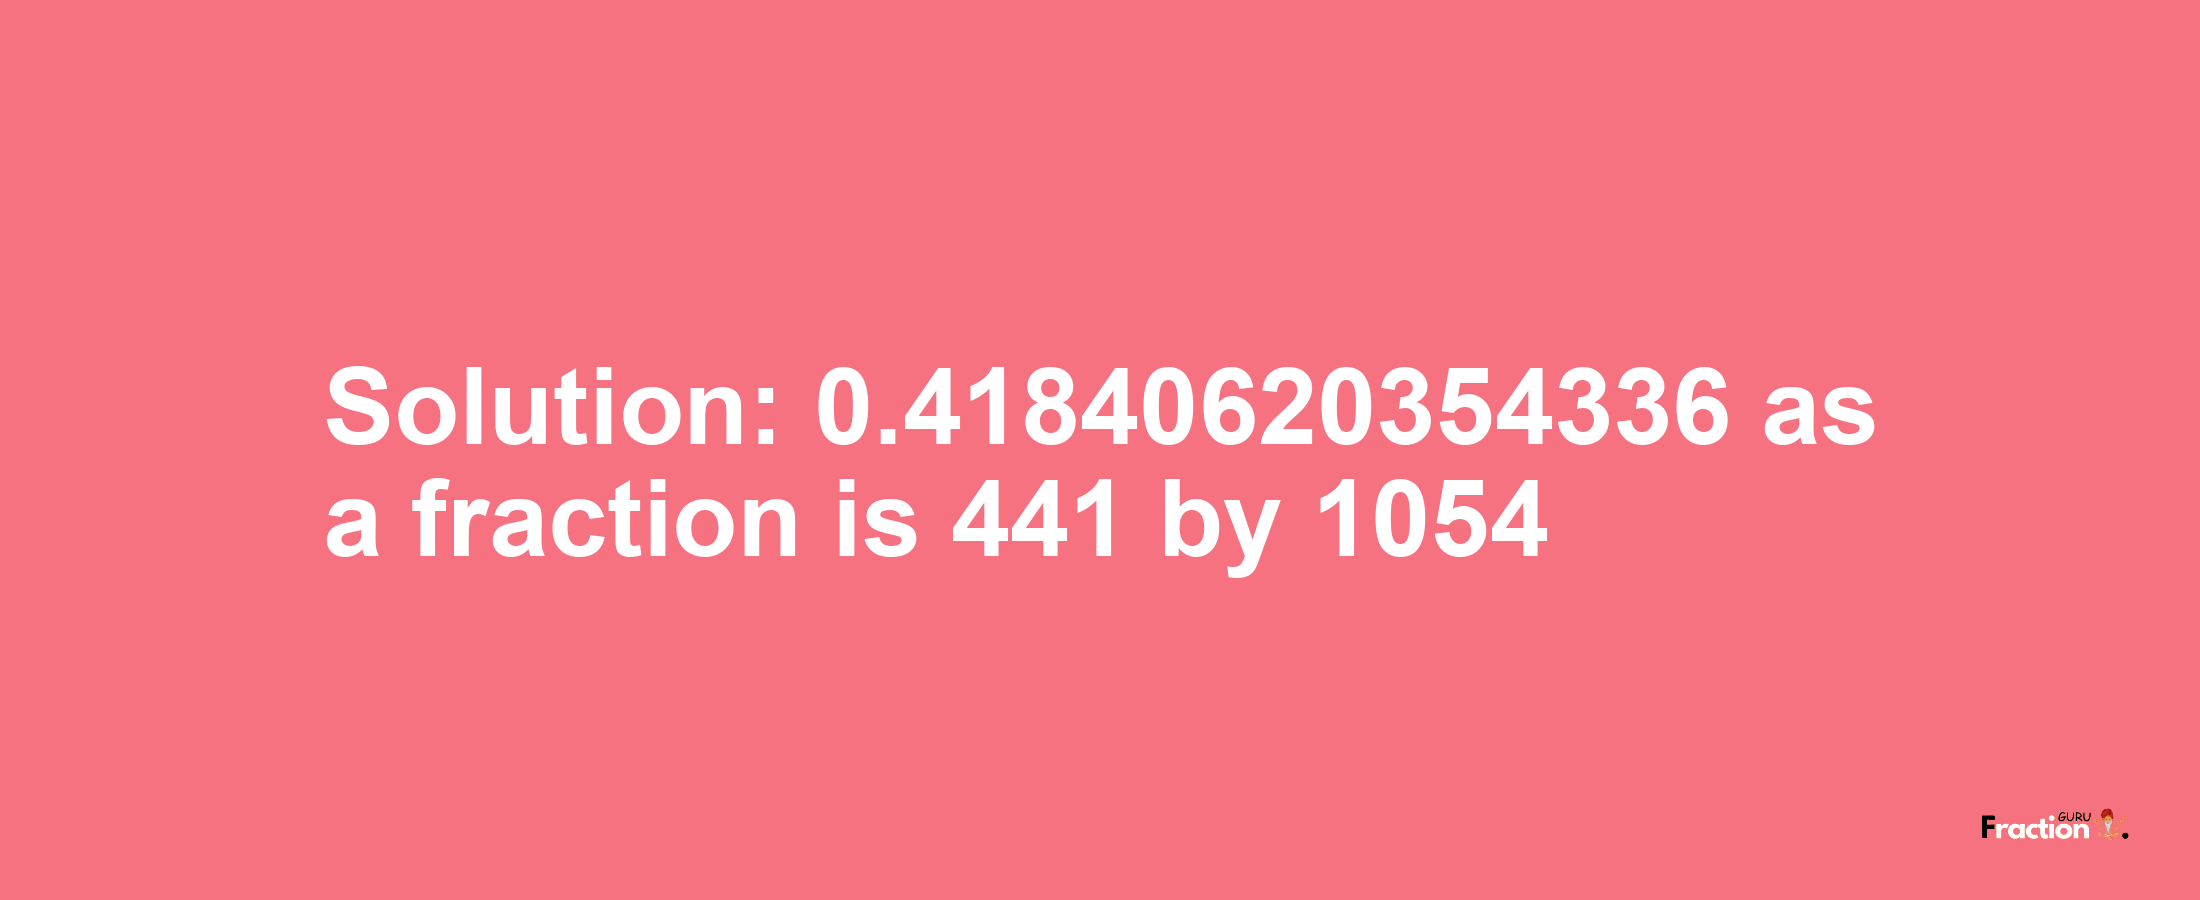 Solution:0.41840620354336 as a fraction is 441/1054